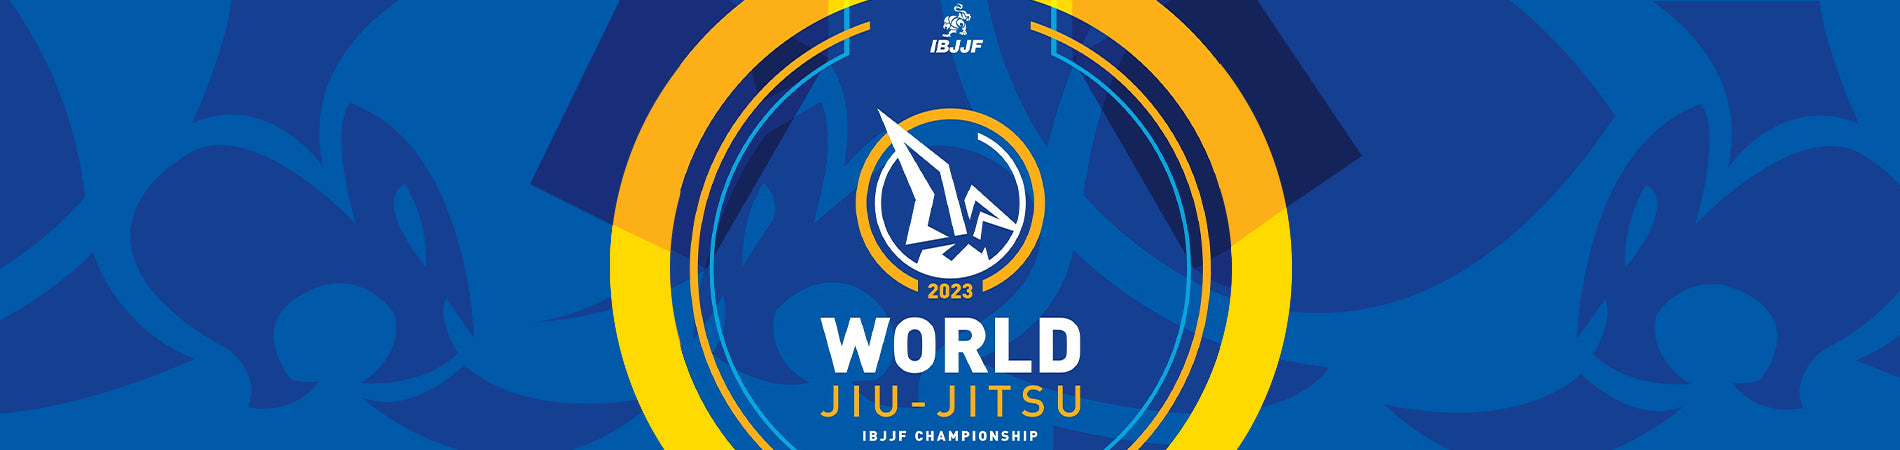 IBJJF World Championship 2023 Complete Results and Reviews